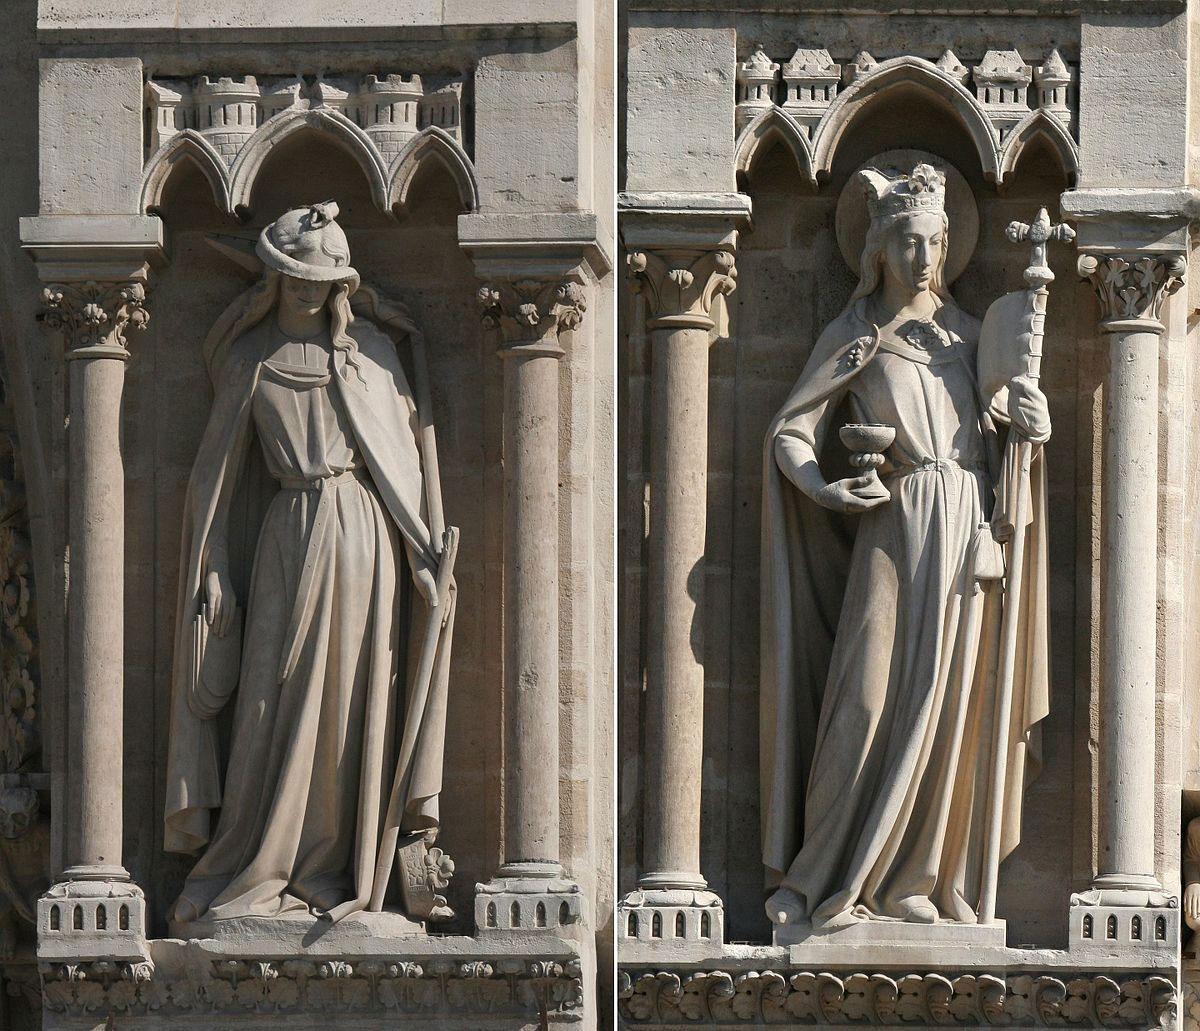 The statues of Ecclesia and Synagoga from the Notre Dame Cathedral, demonstrating the victory of Christianity over Judaism